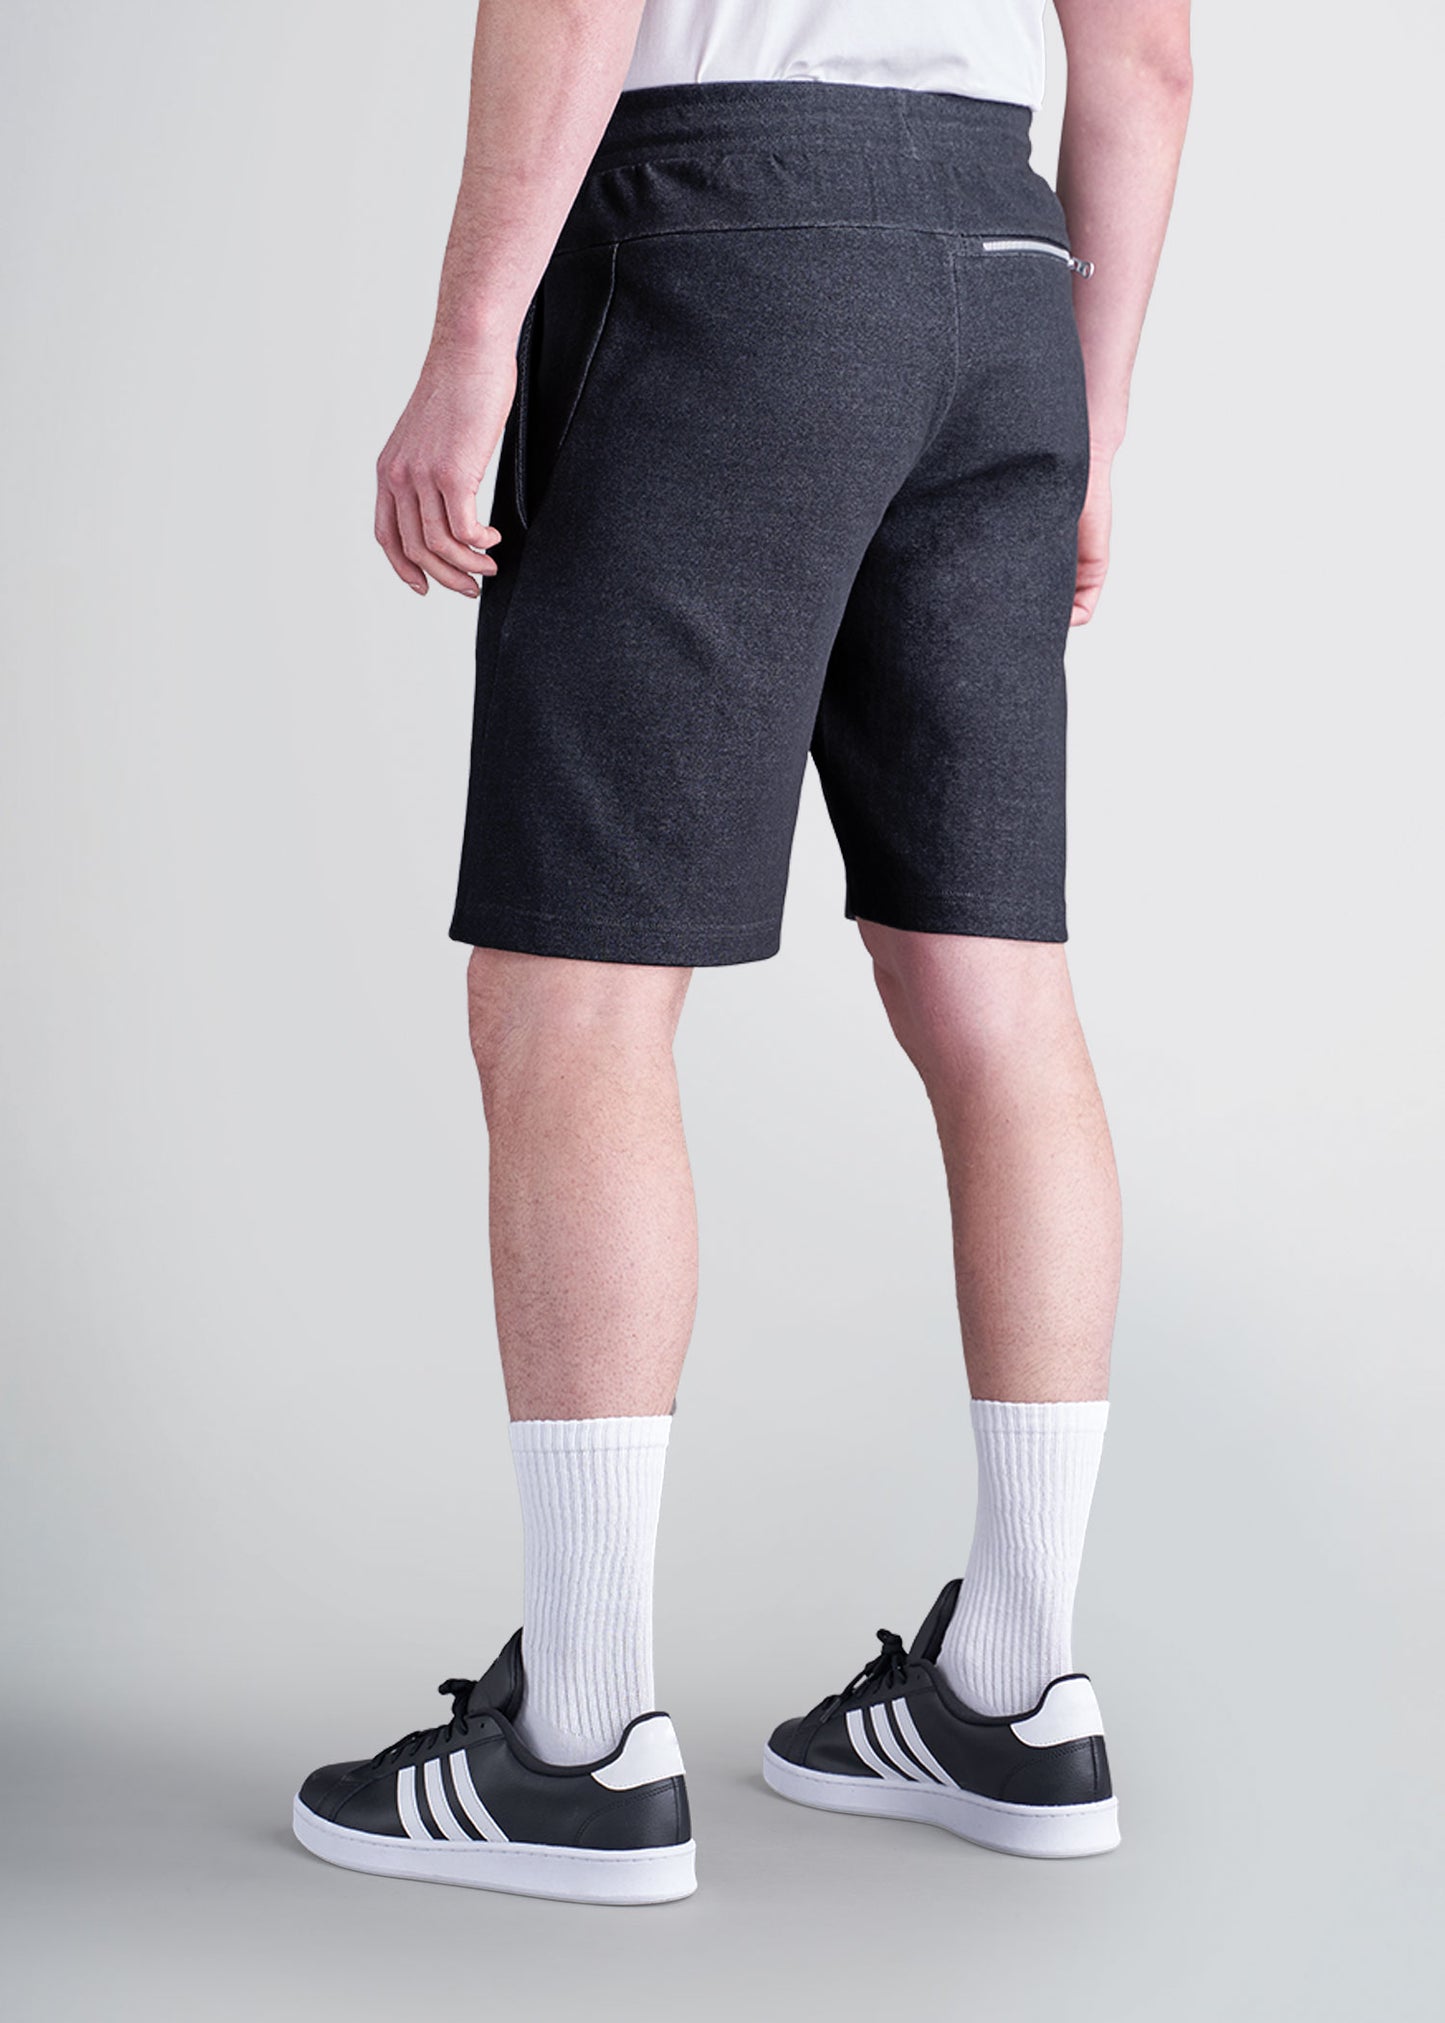 american-tall-mens-knit-athletic-shorts-charcoal-back